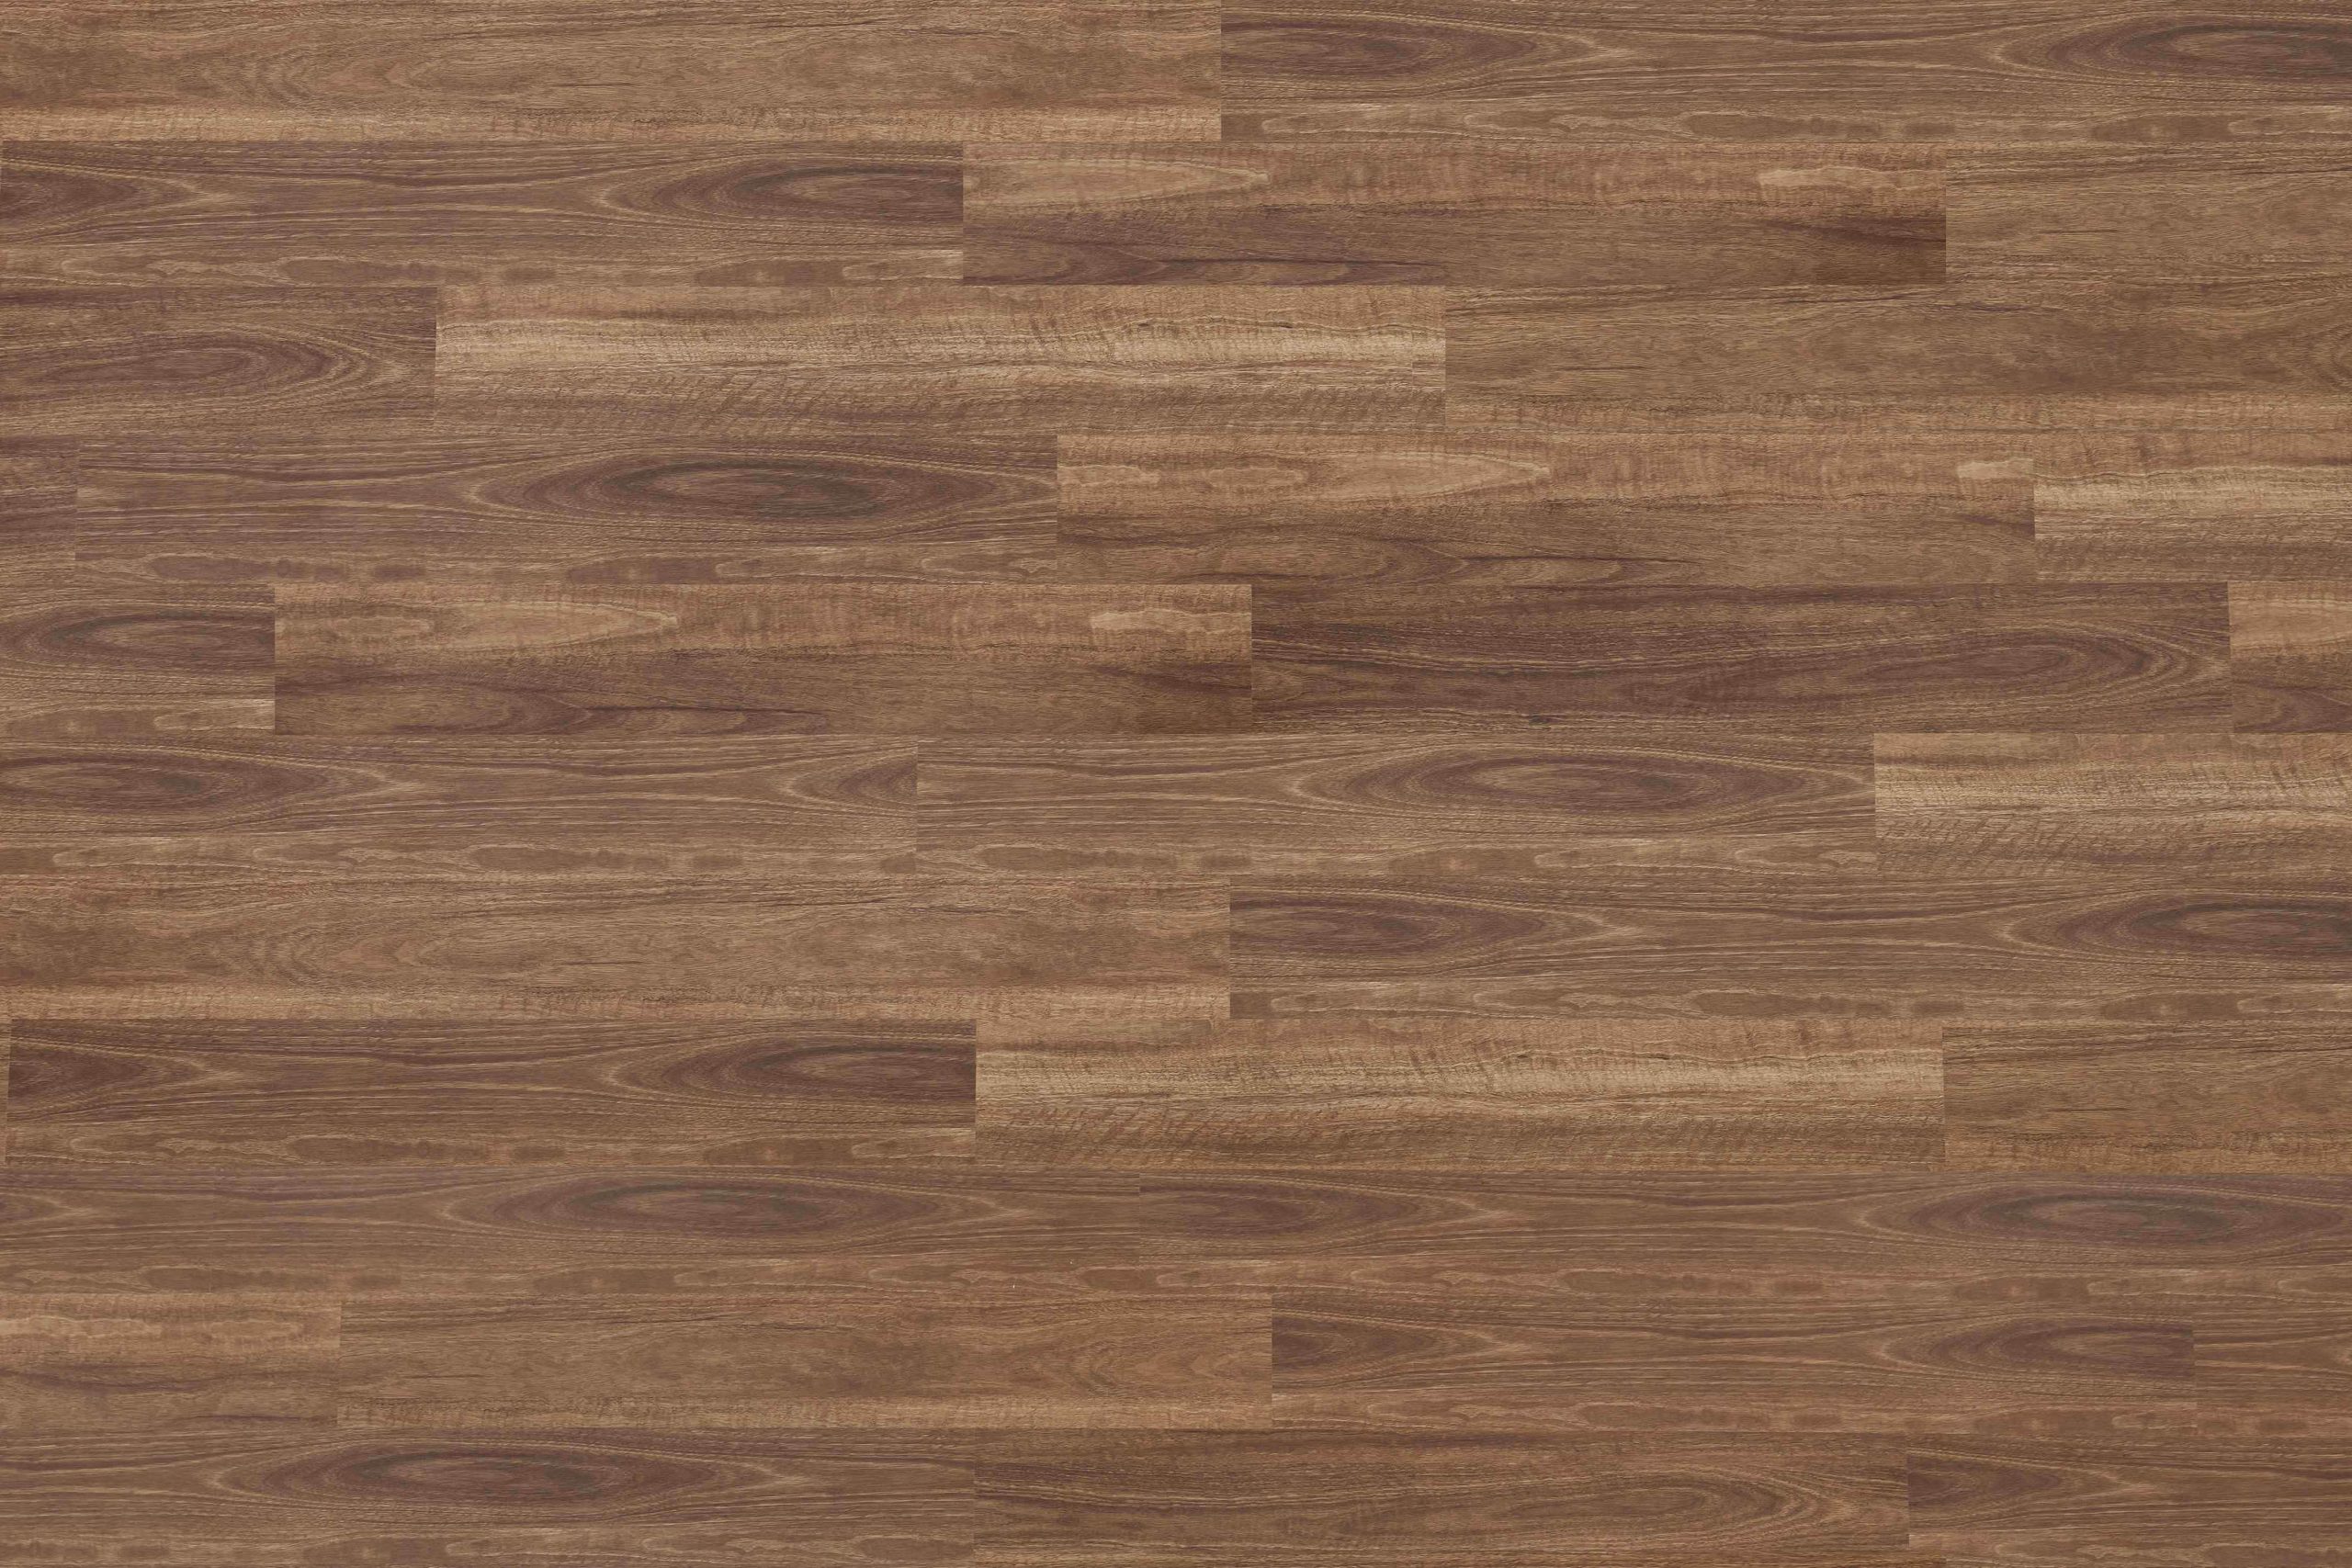 Snowy River Gum Timber Flooring - Abbey Timber